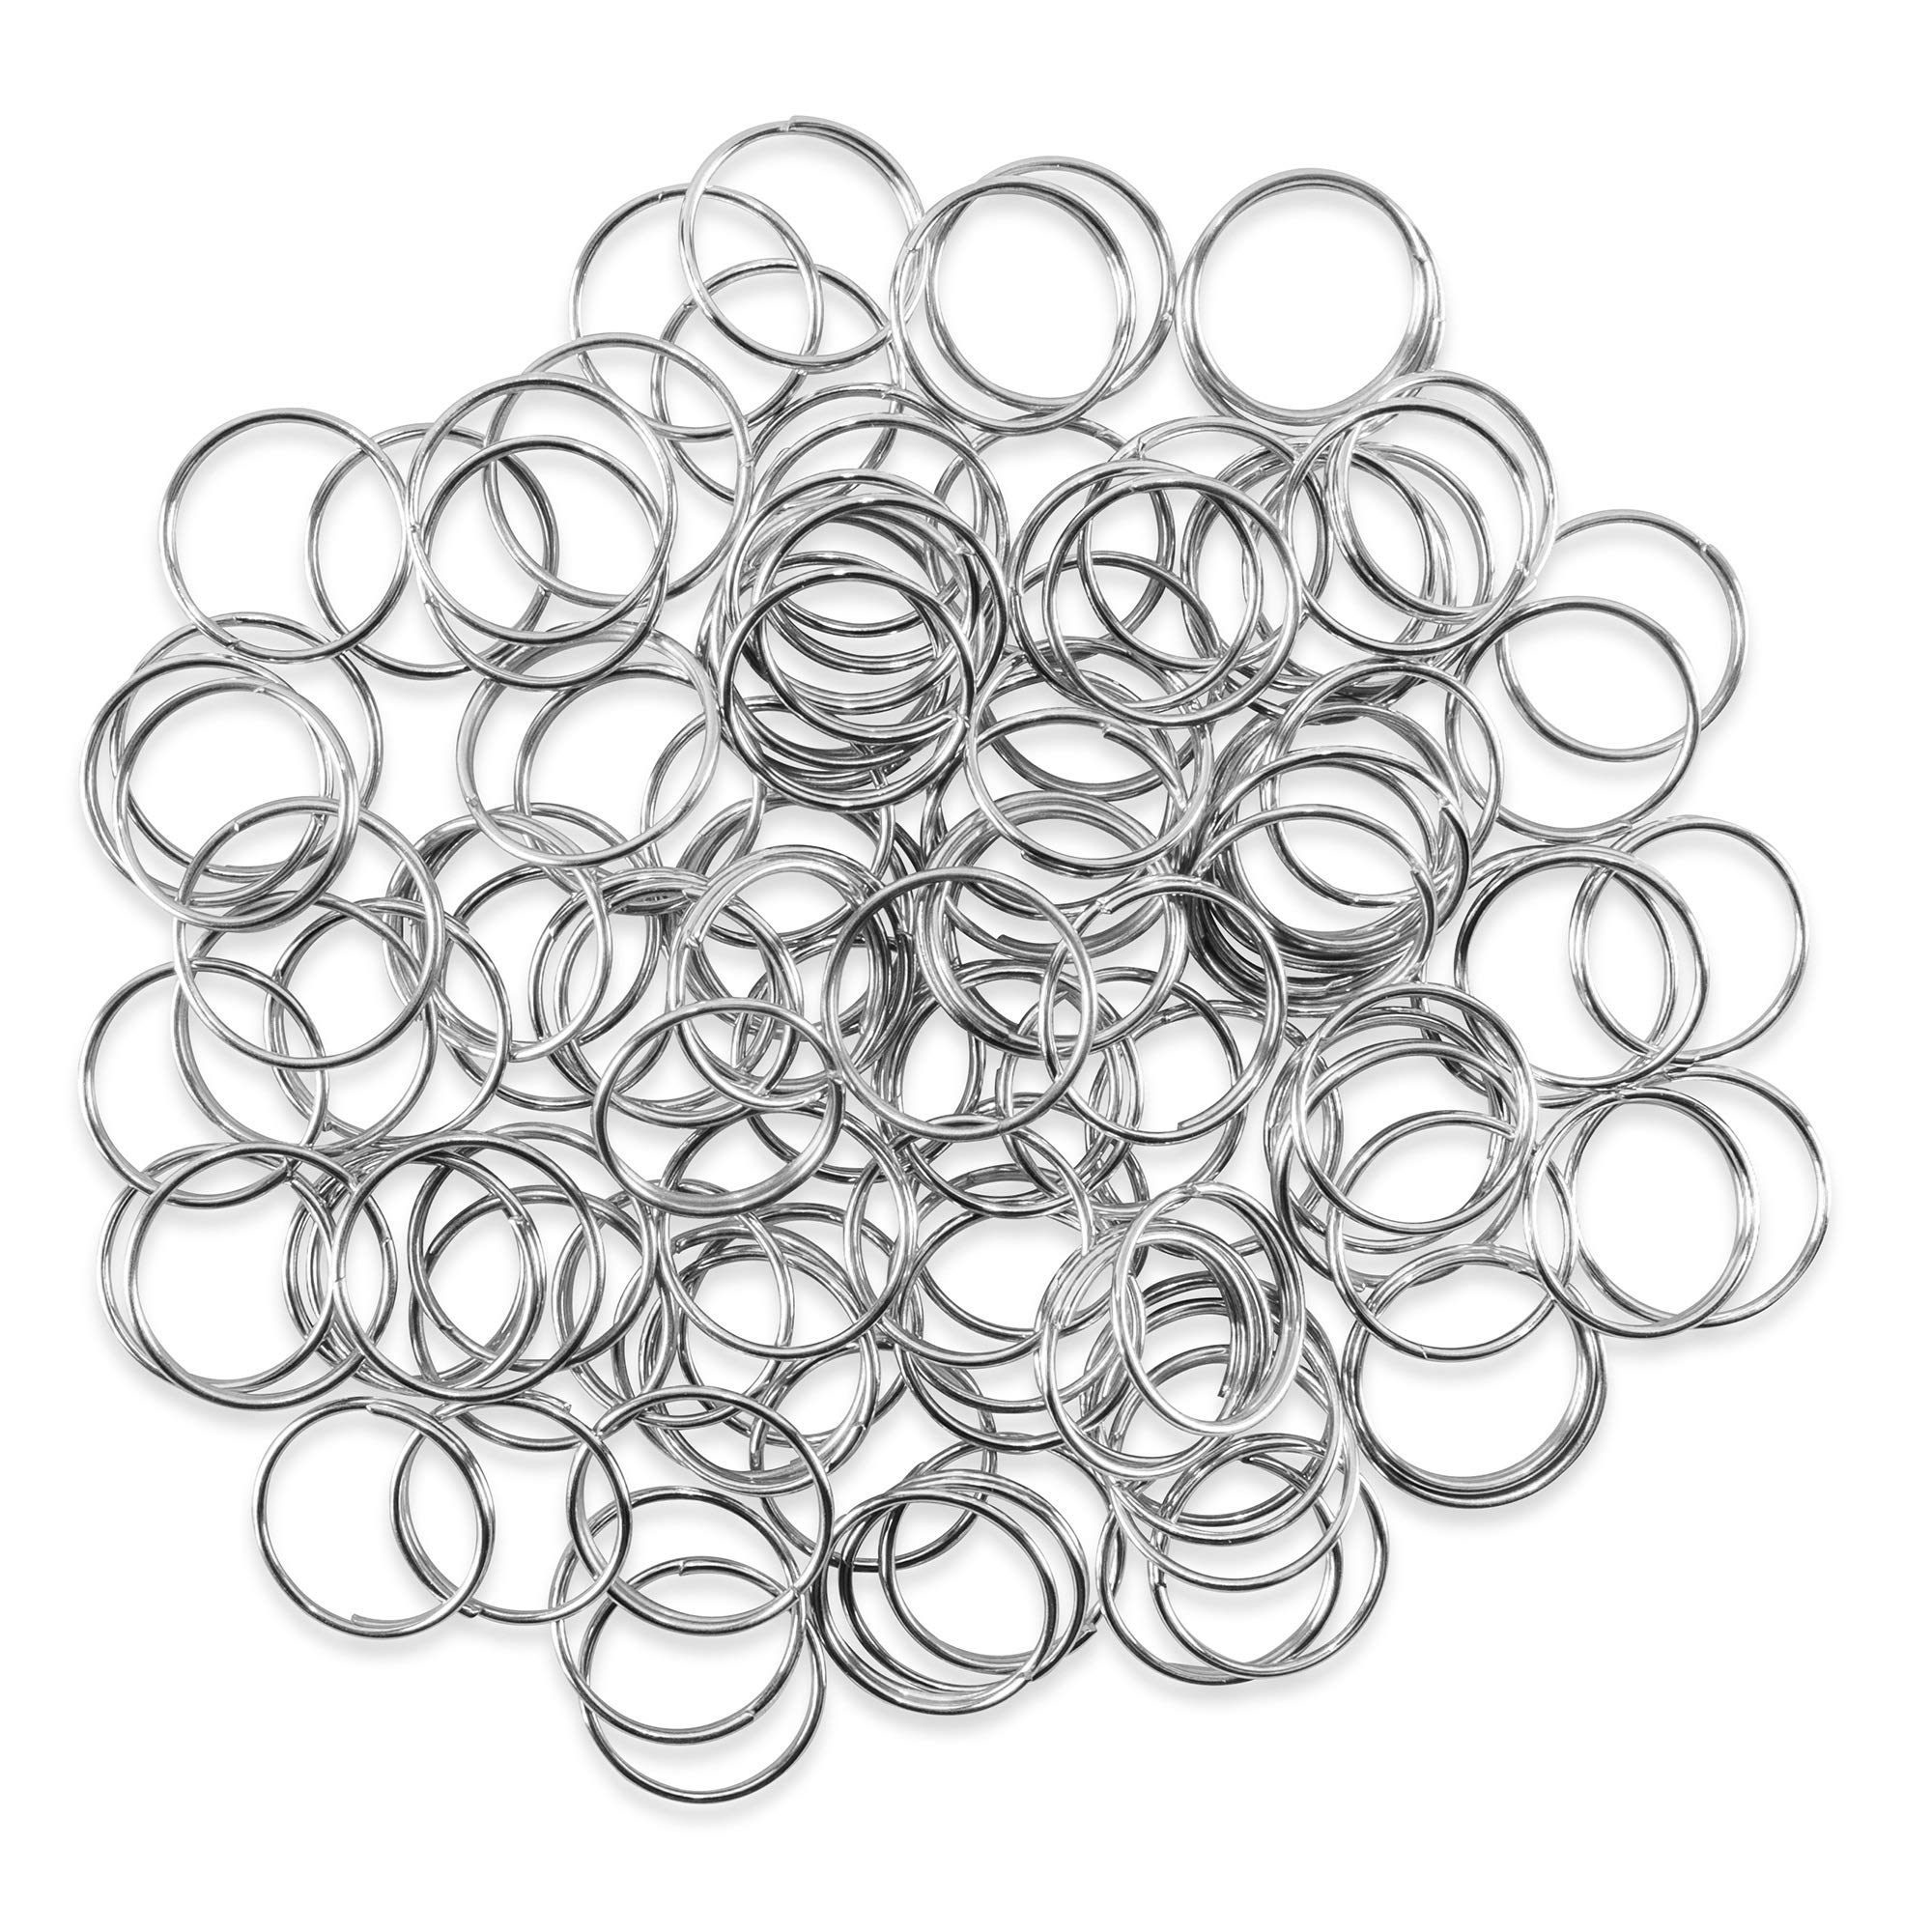 12mm Black Jump Rings 100 Pieces Large Jump Rings Strong Jewellery Findings  